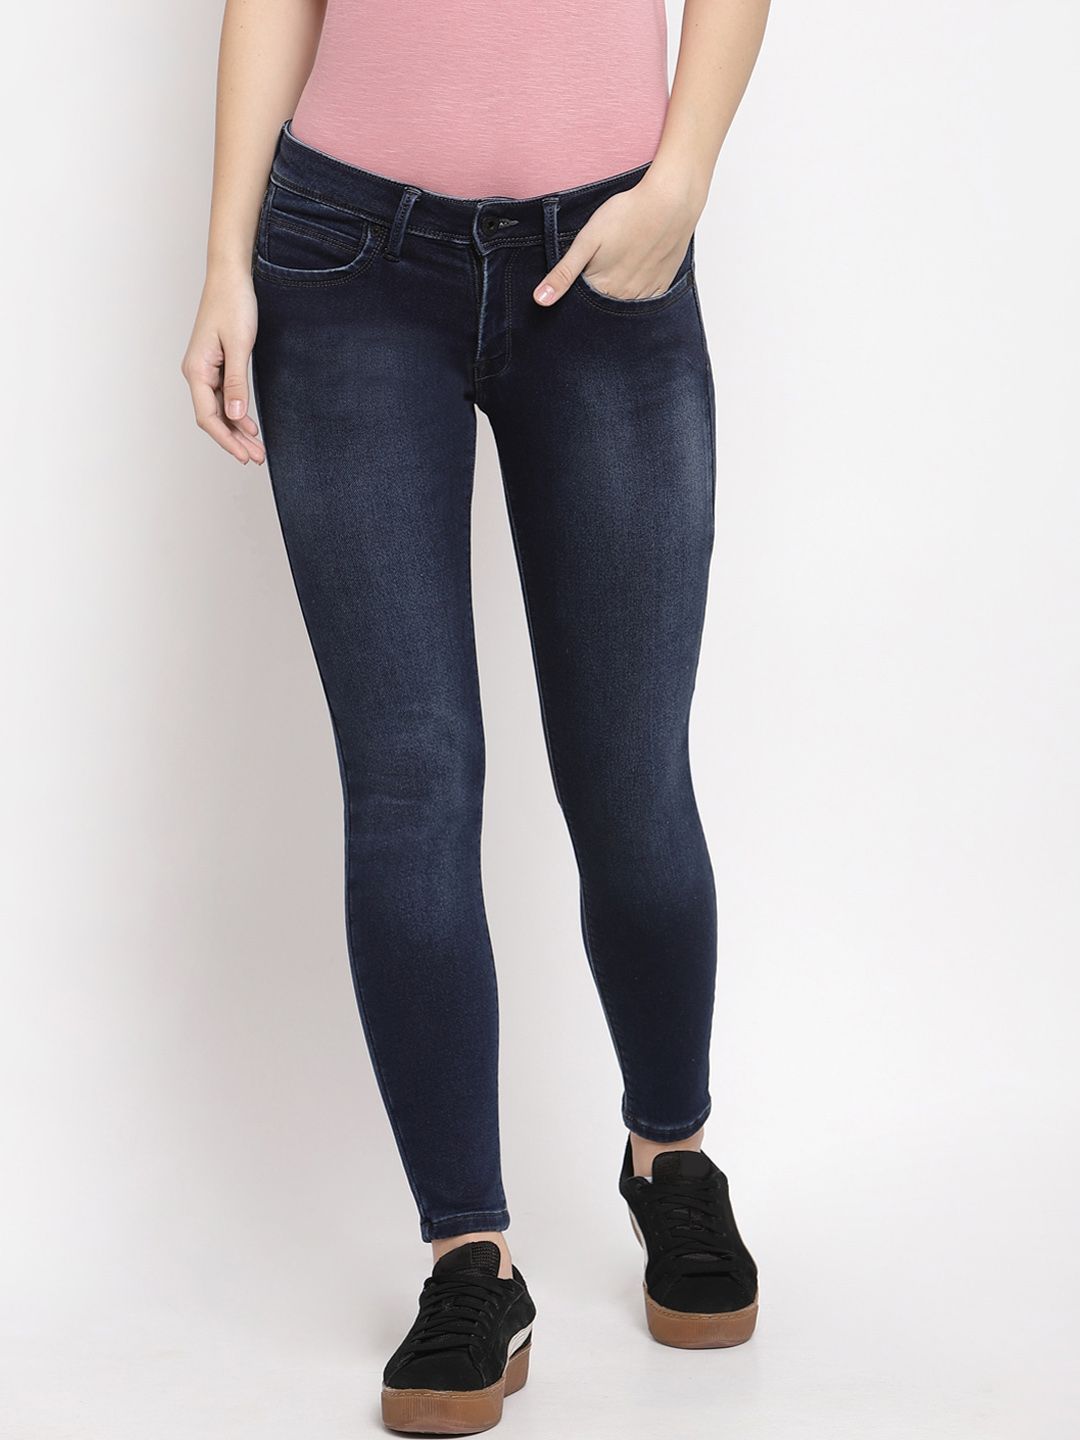 Pepe Jeans Women Blue Light Fade Jeans Price in India